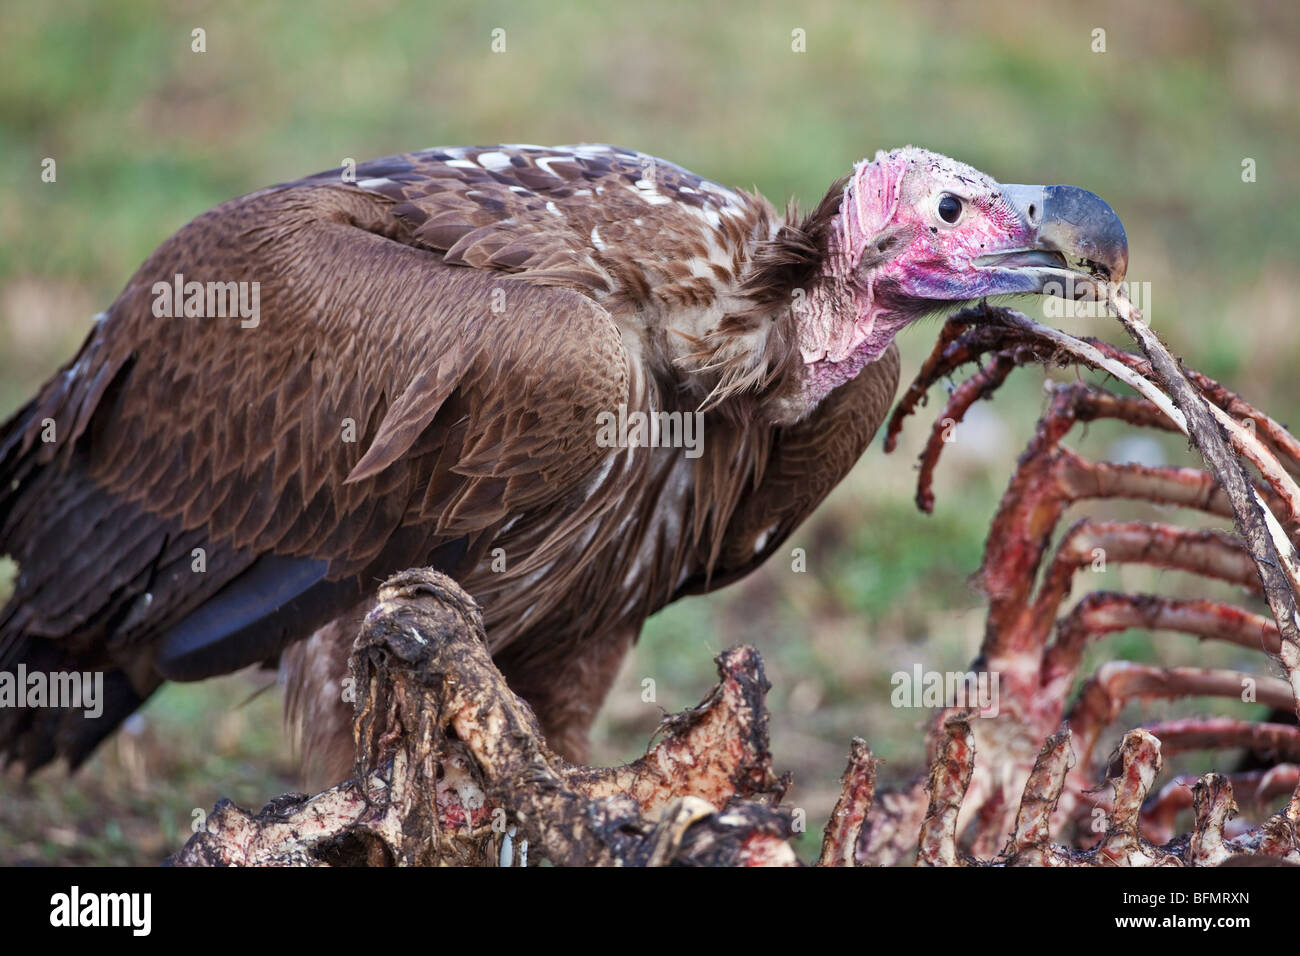 Kenya. A lappet-faced vulture feeds on a wildebeest carcass in Masai Mara National Reserve. Stock Photo